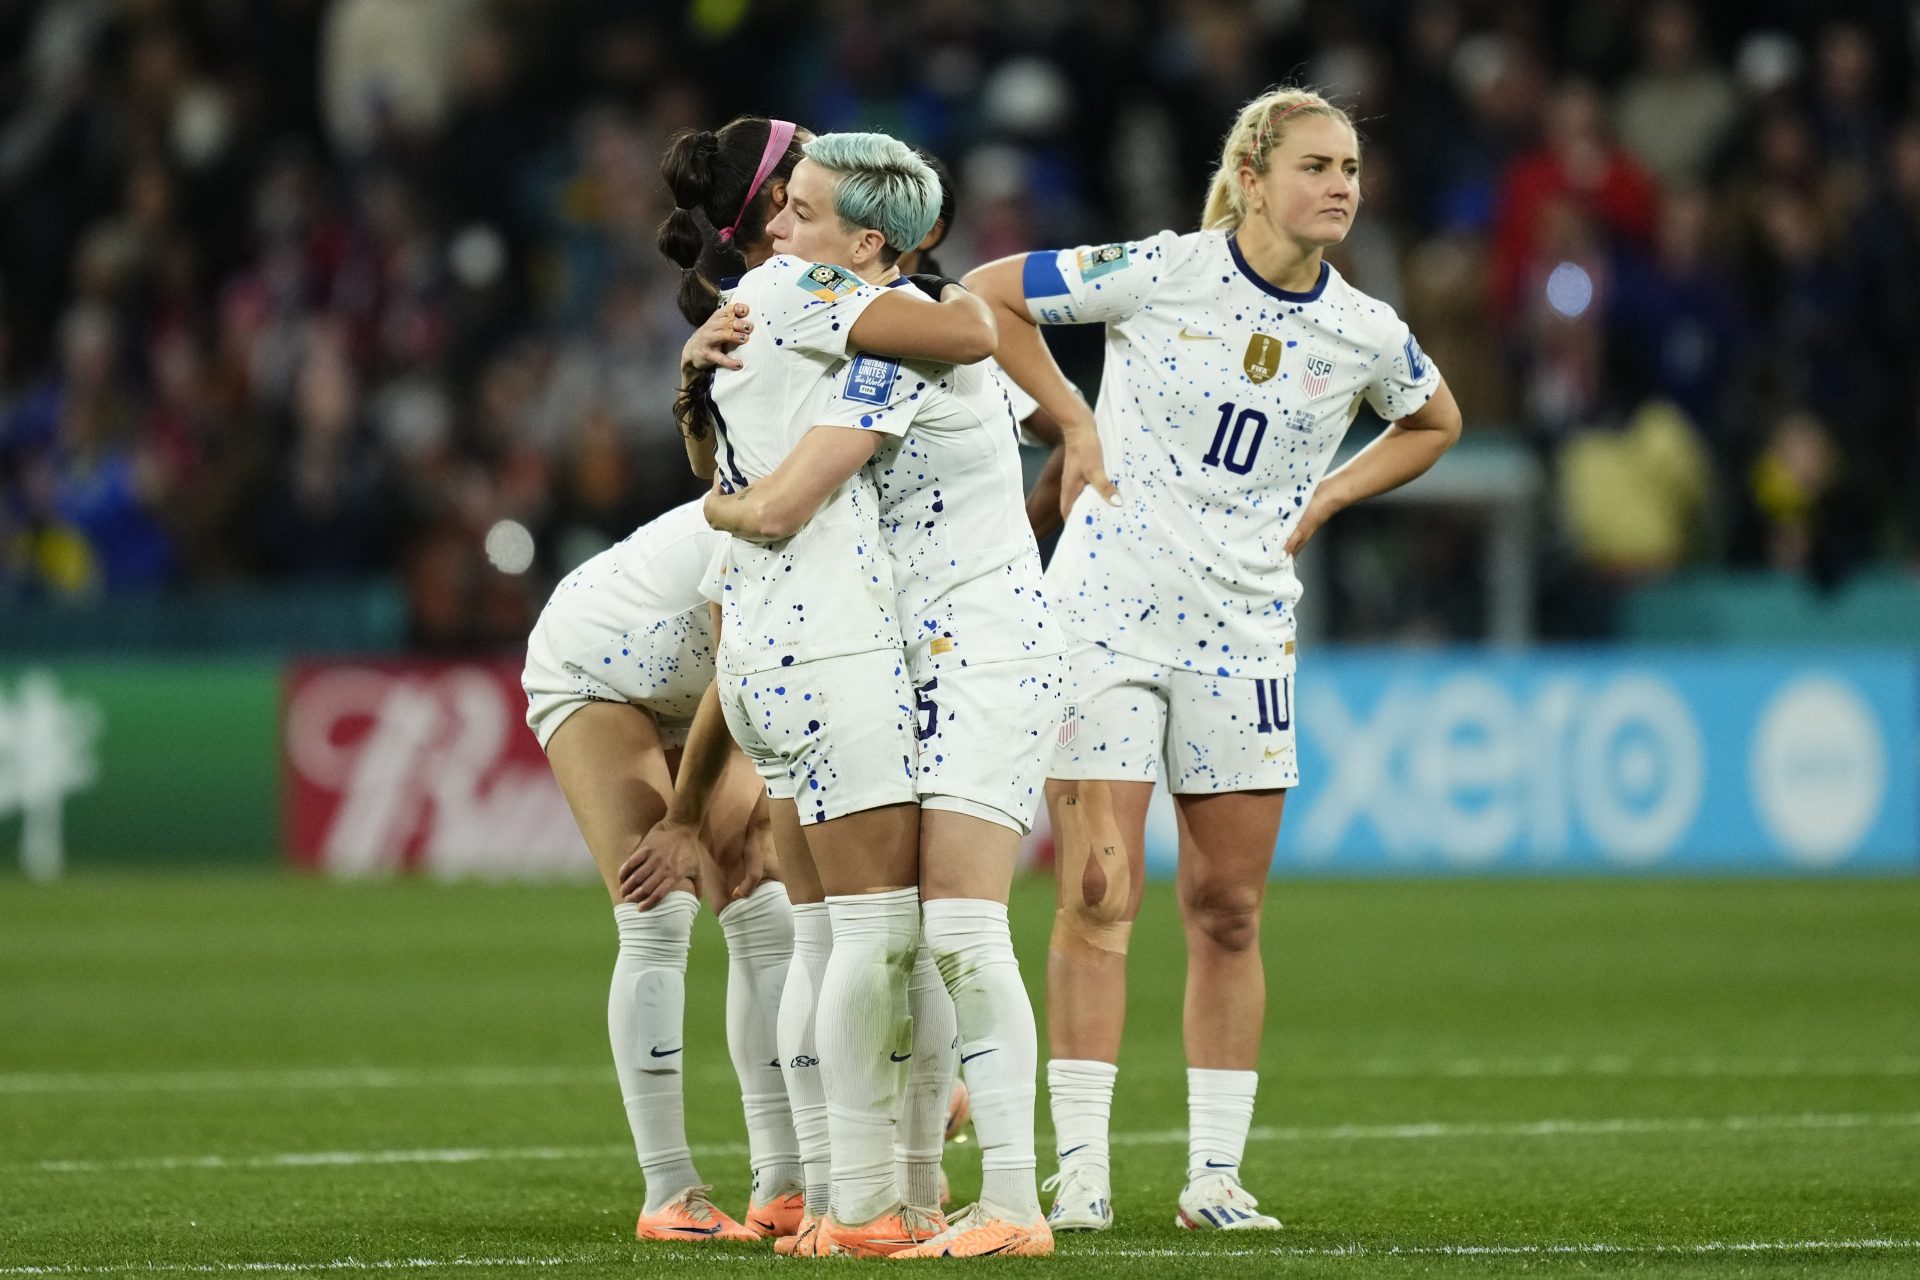 What went wrong for the US women’s team at the World Cup?